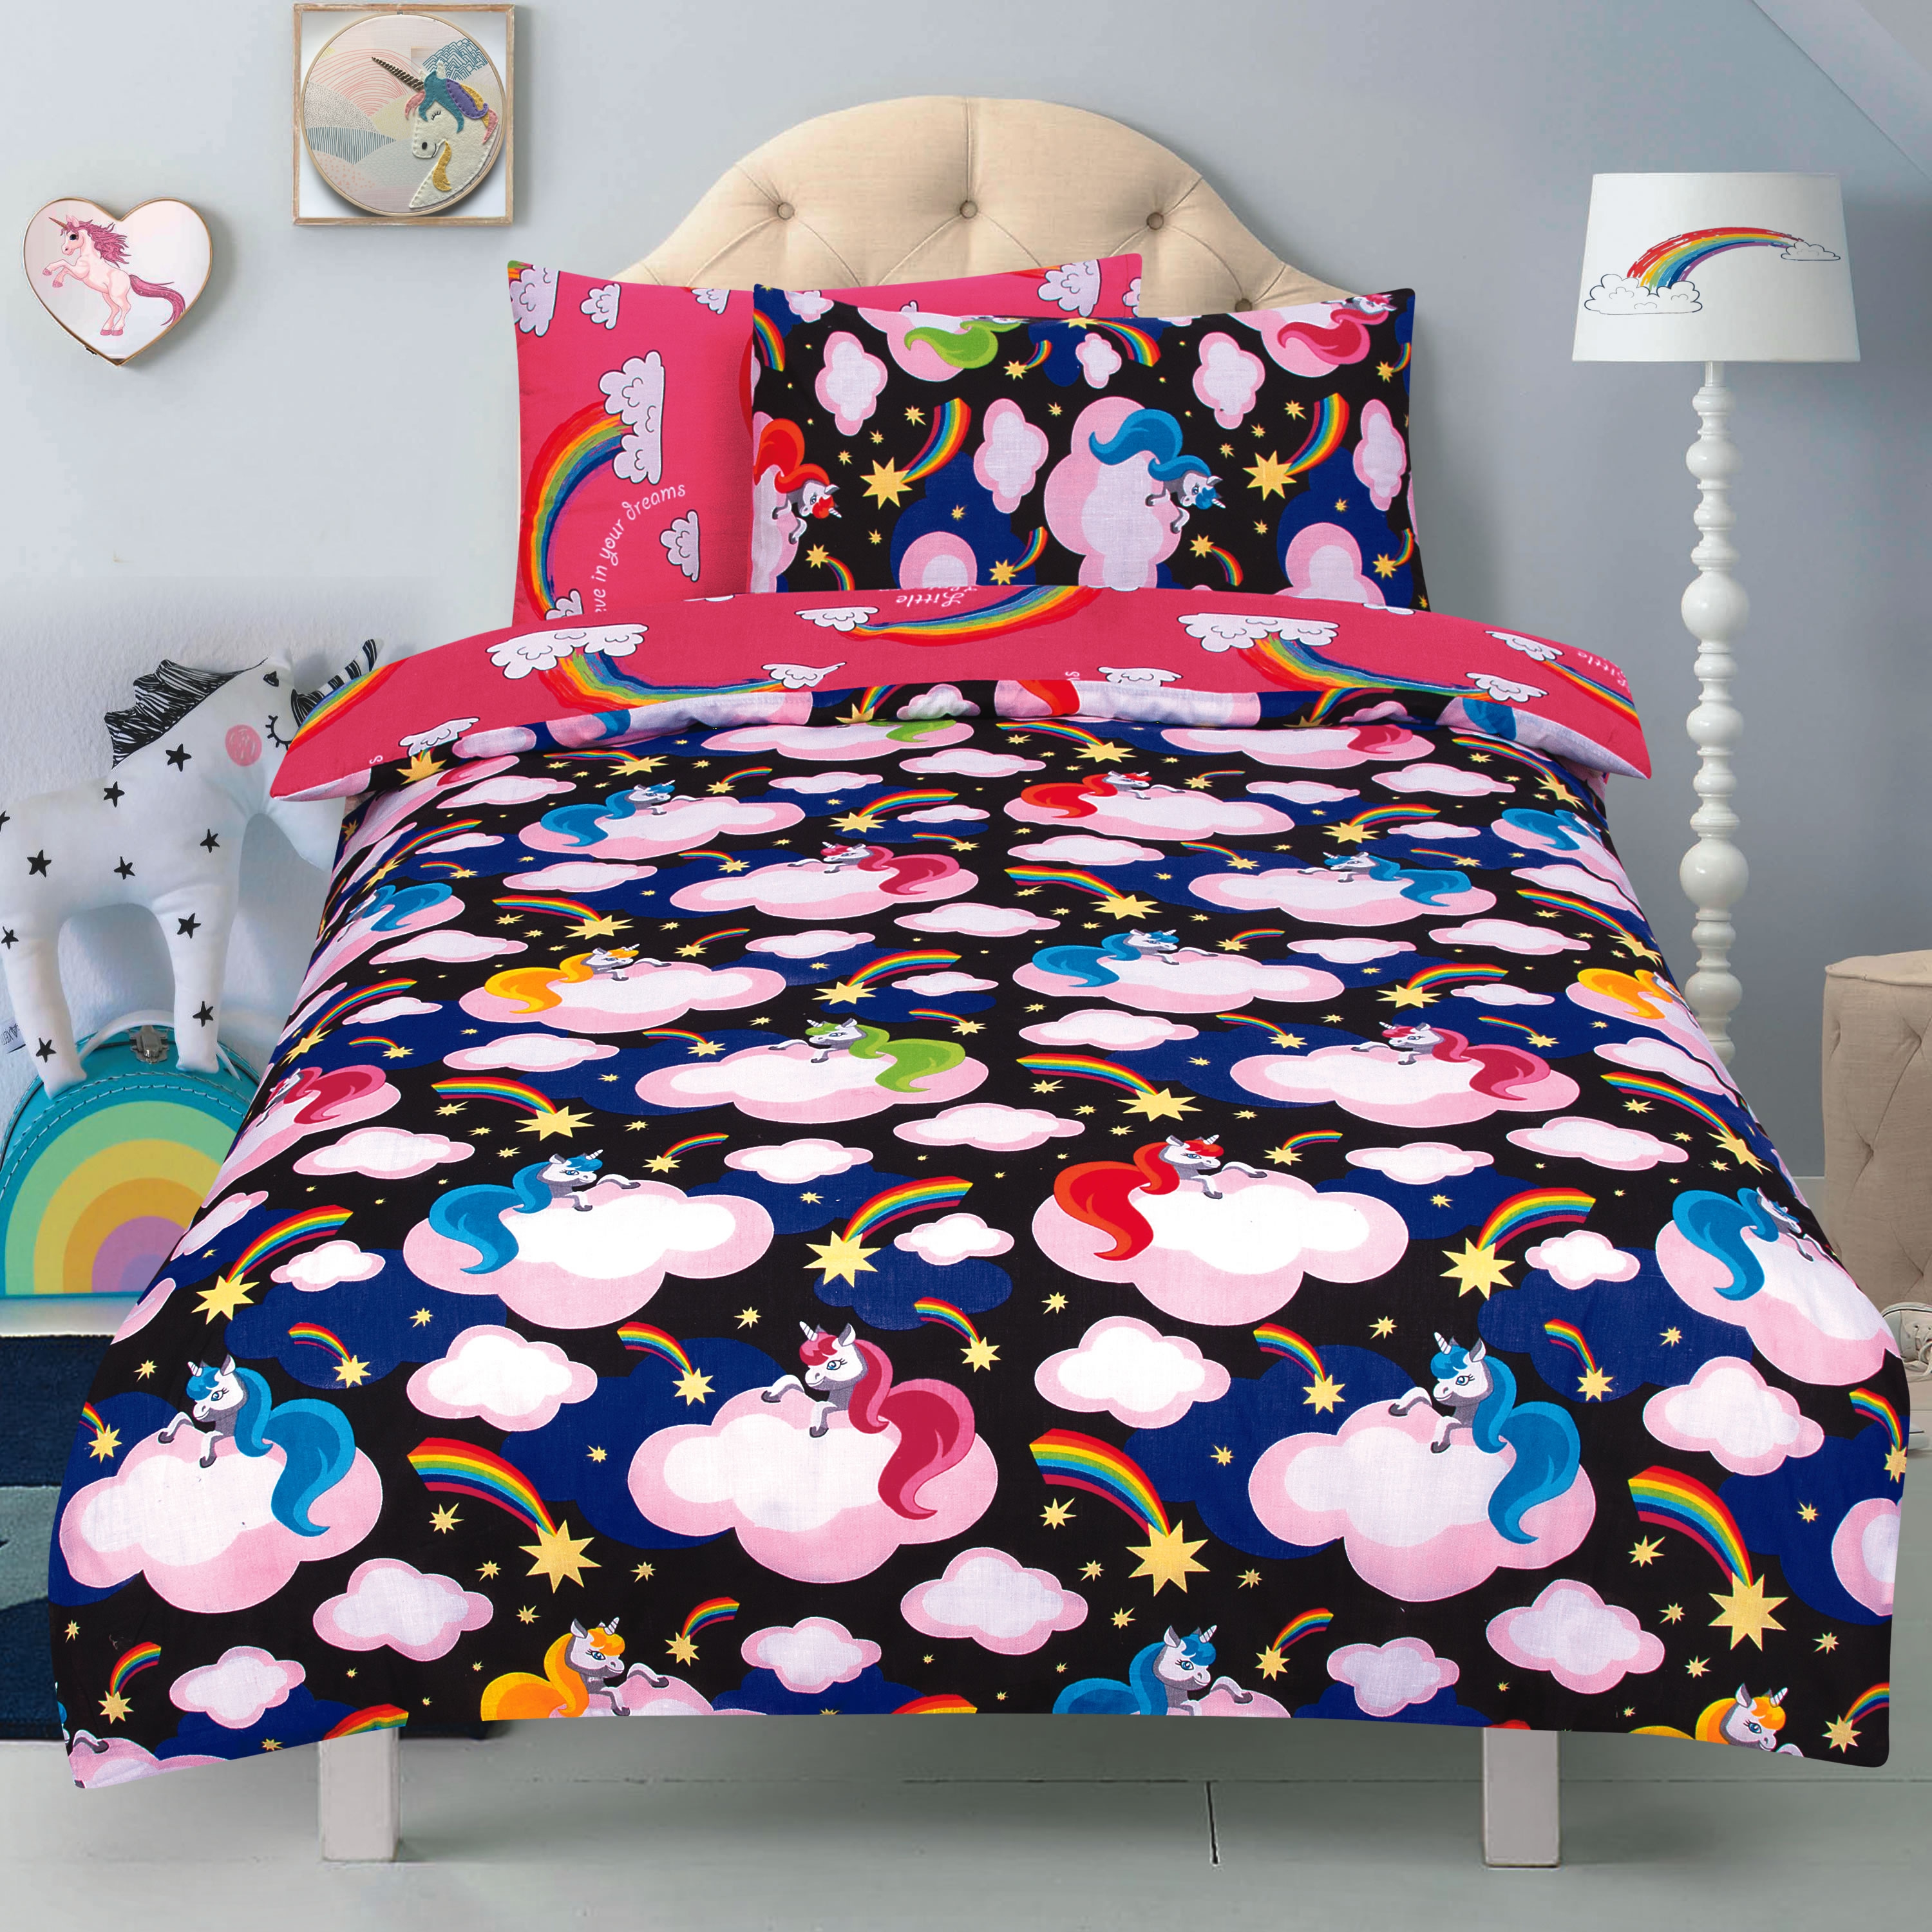 Unicorn 'Believe In Your Dreams' Black Reversible Pink Rotary Double Bed Duvet Quilt Cover Set